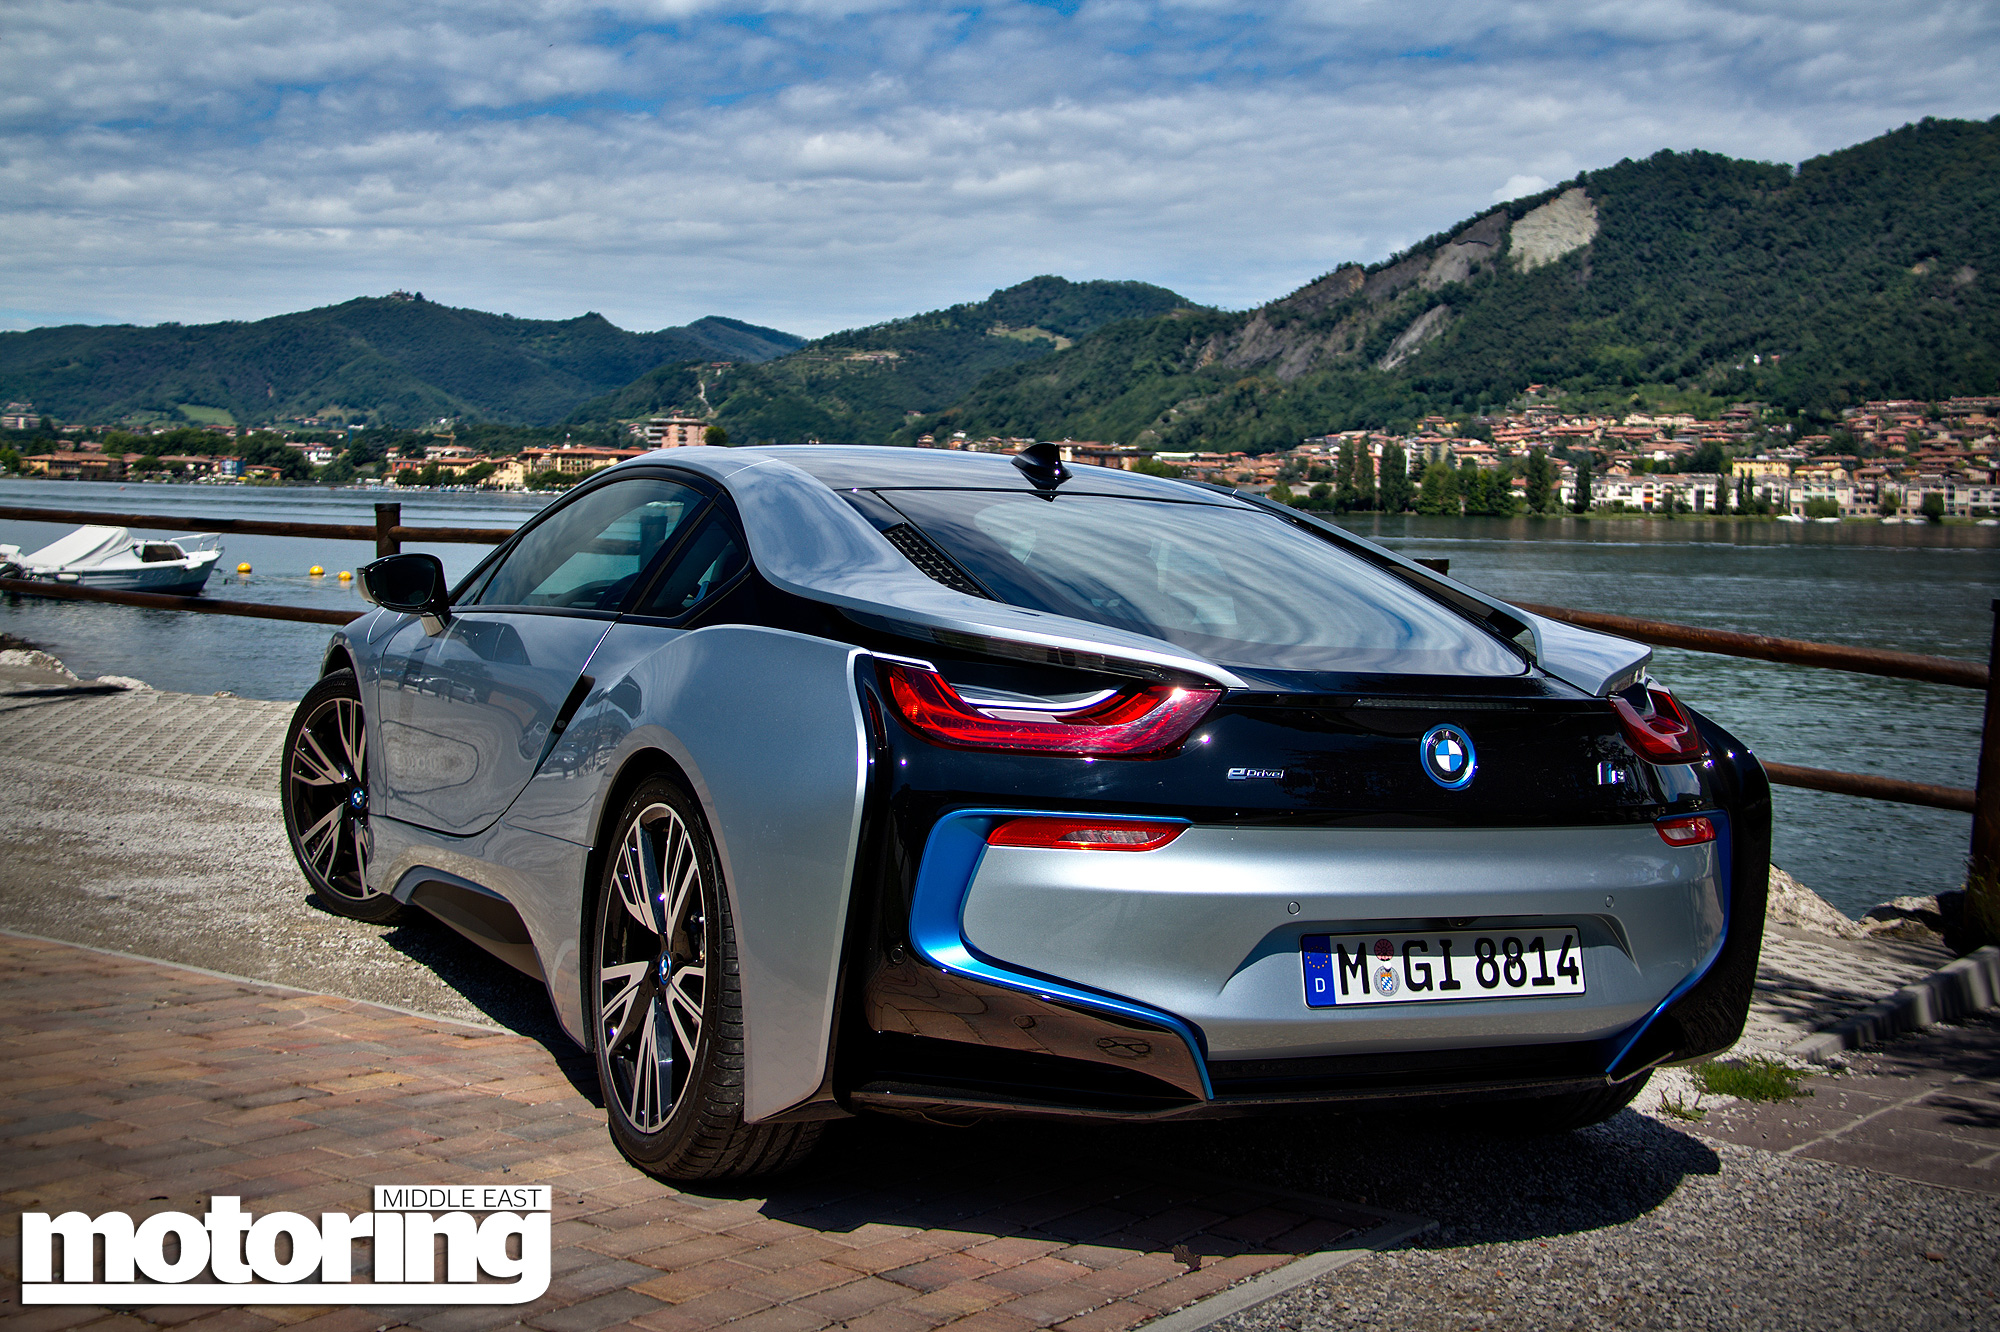 2015 Bmw I8 Review Specs Video Pics Price Verdictmotoring Middle East Car News Reviews